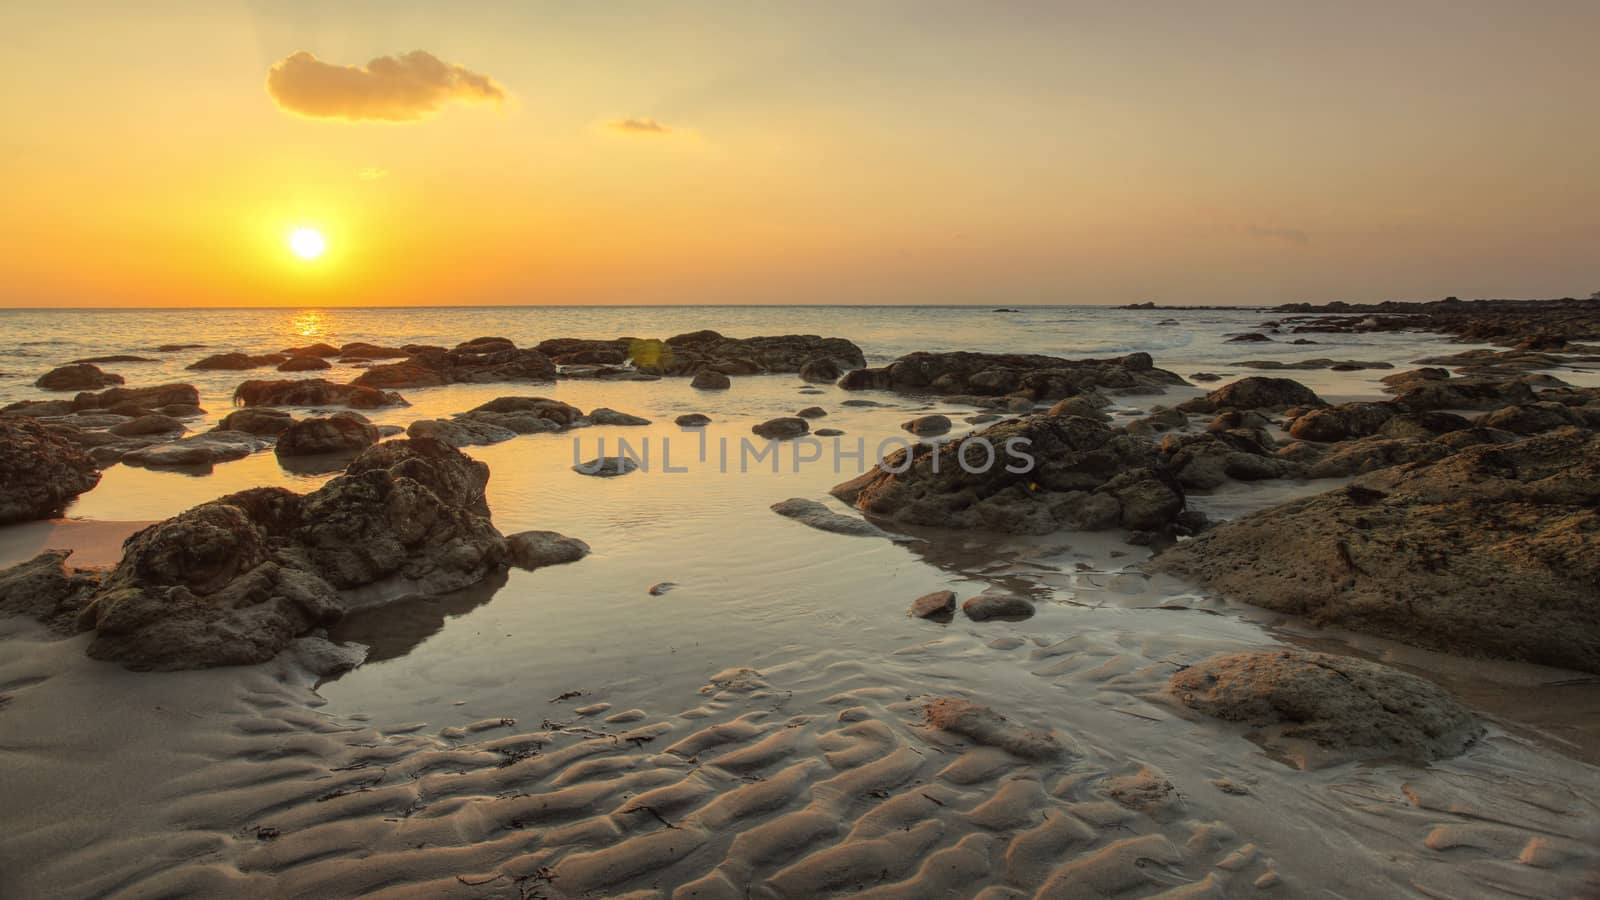 Beach in golden sunset light during low tide showing sand format by Ivanko